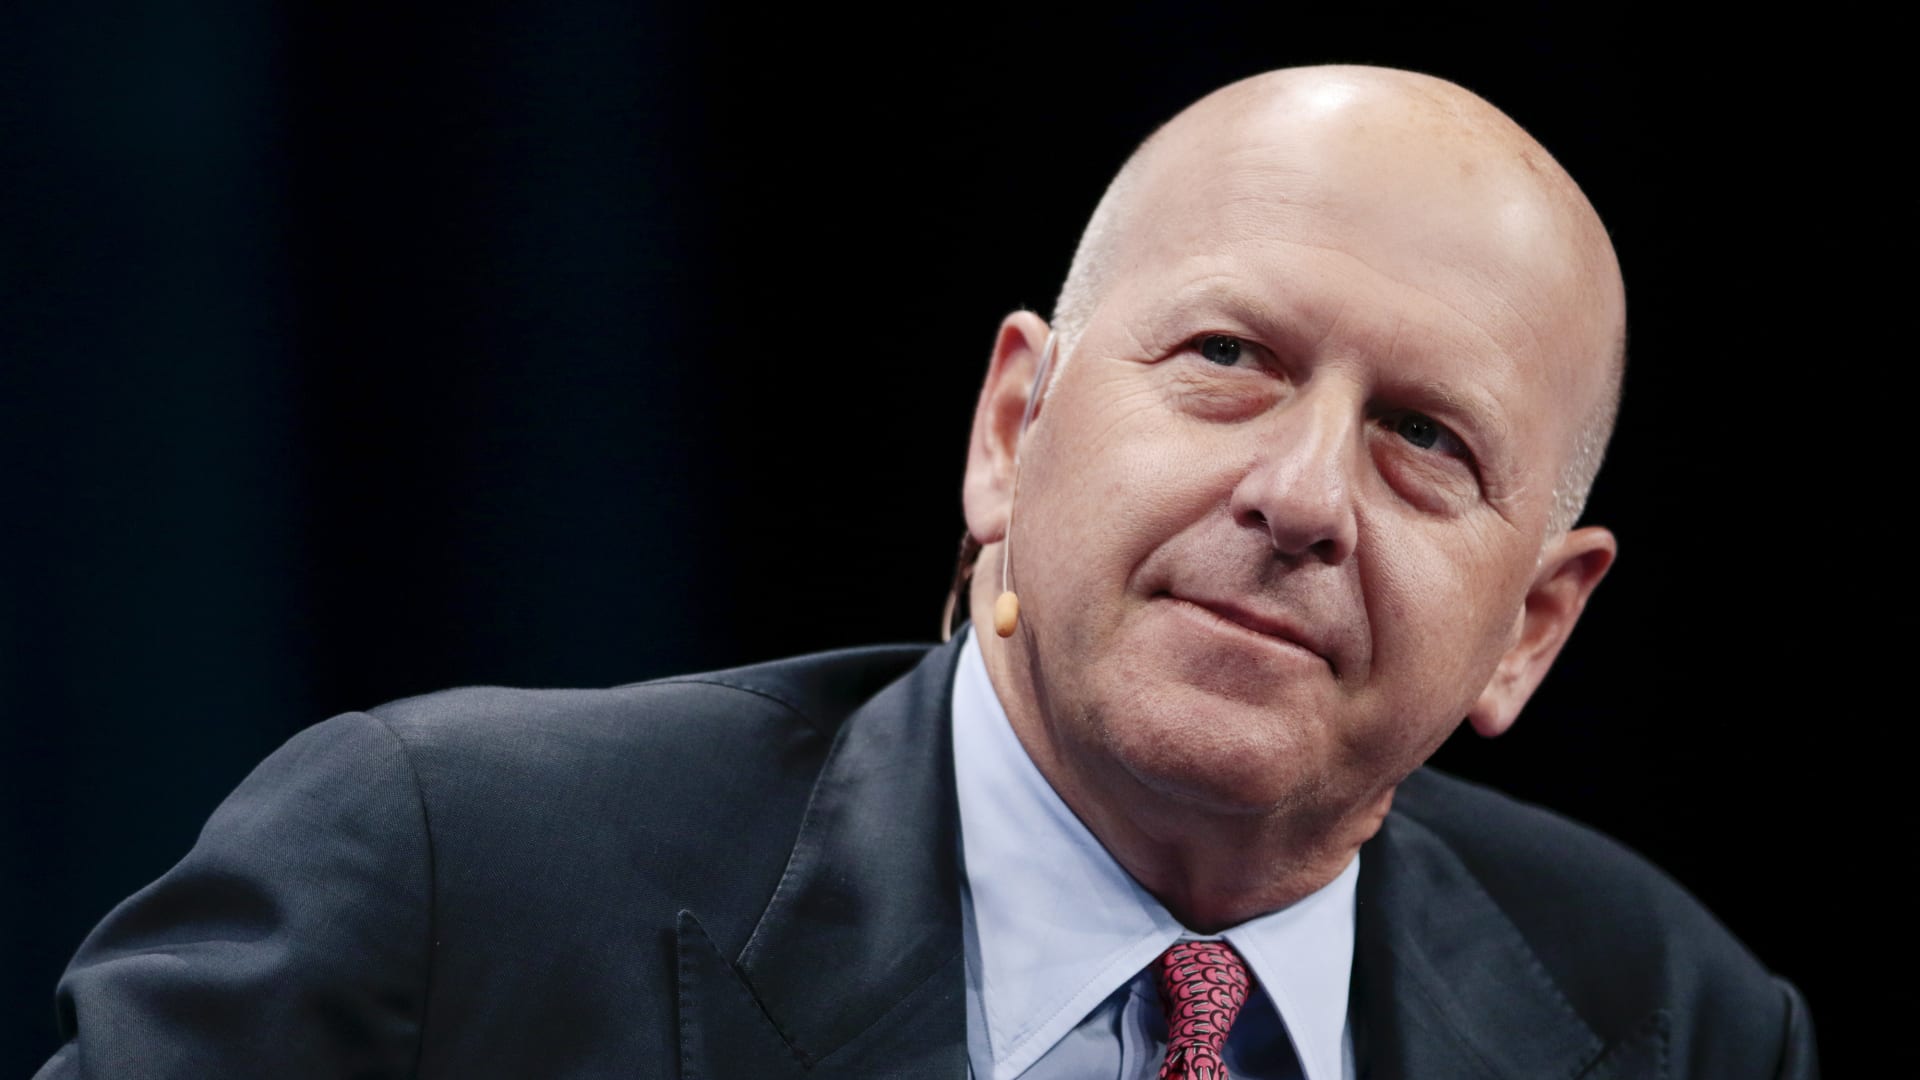 Goldman Sachs CEO says he expects a ‘reopening’ in capital